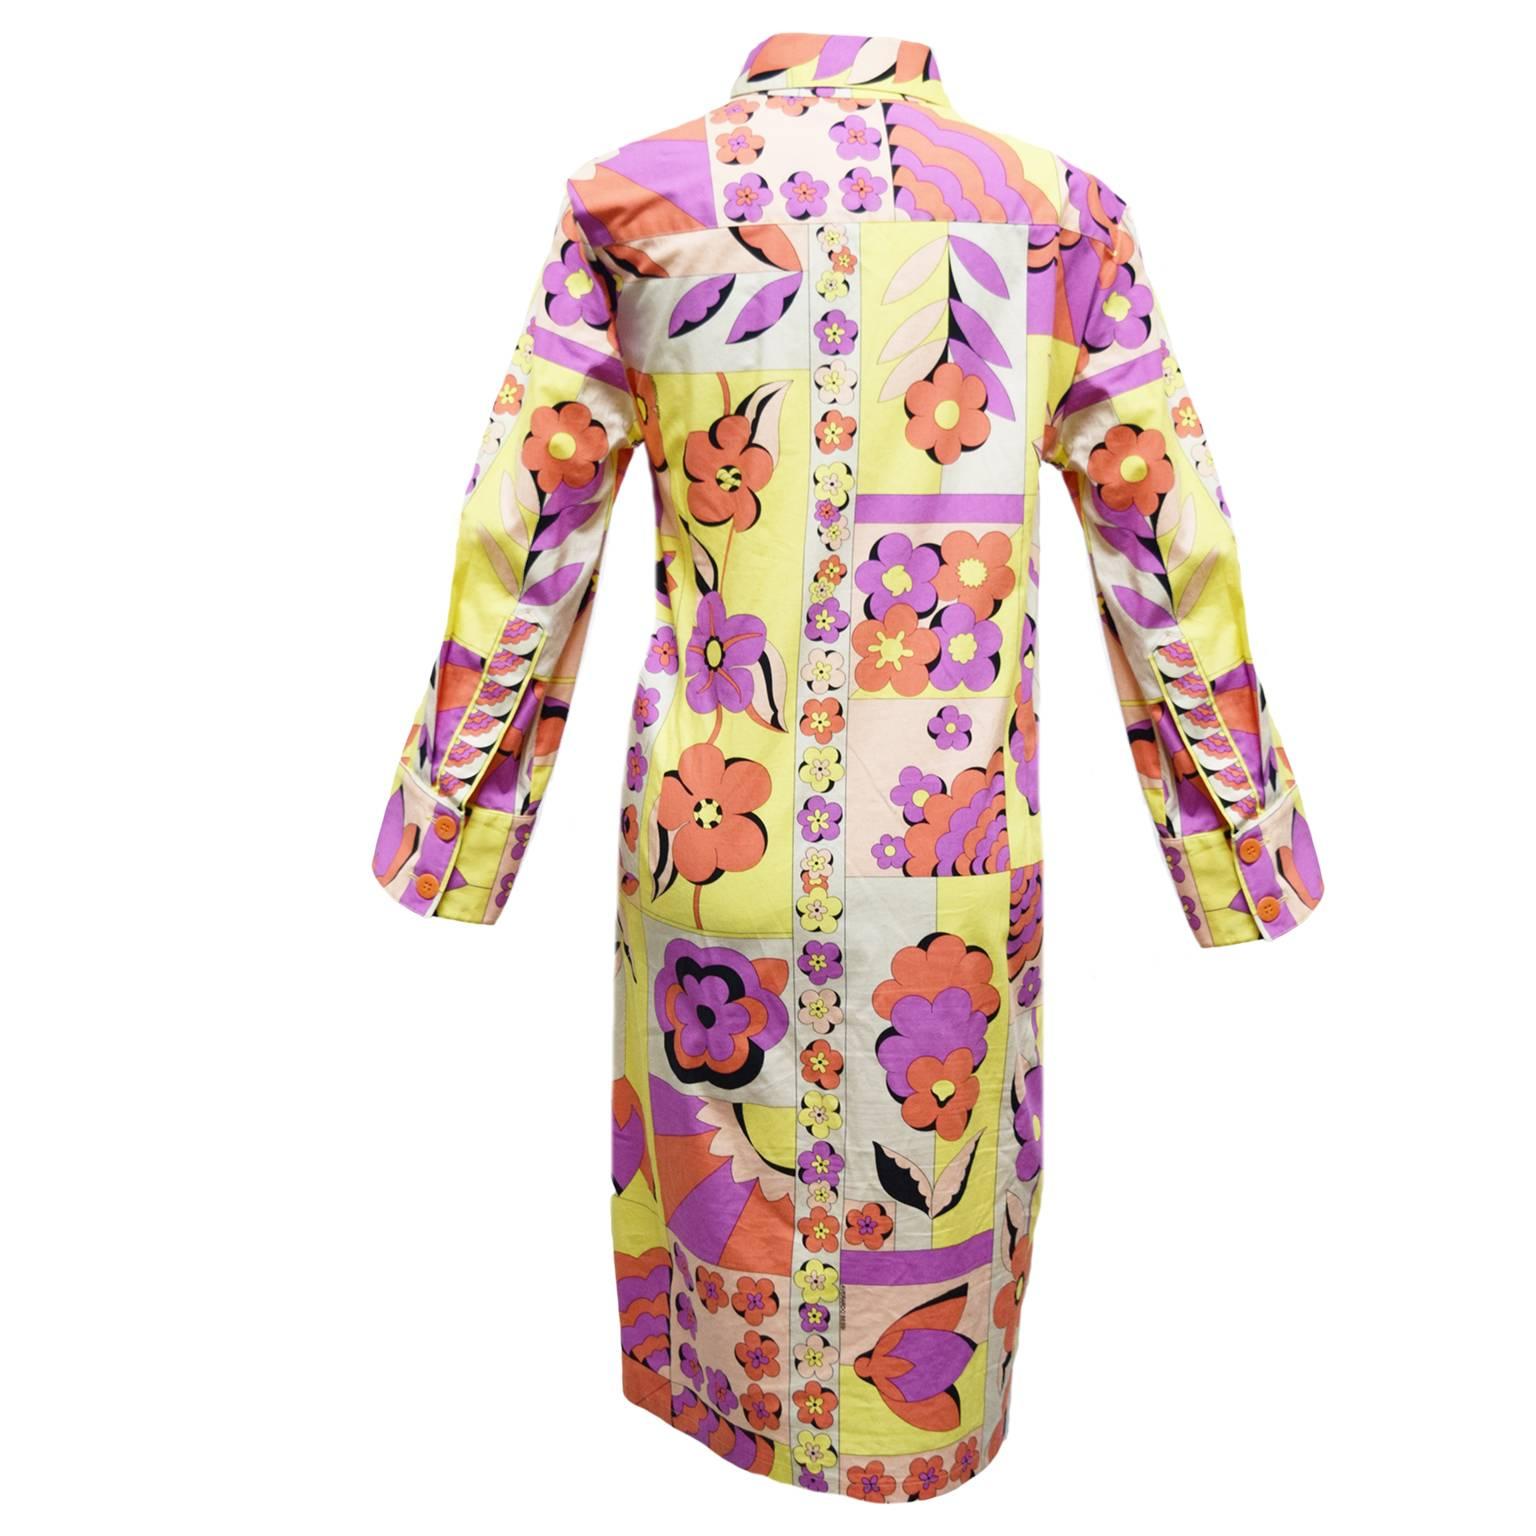 This vintage Averado Bessi shirt dress is made out of 100% cotton and has a printed detachable belt. This designer originally an in house designer for Emilio Pucci, made this inspired print with an array of orange, yellow, Barney, Black and Beige